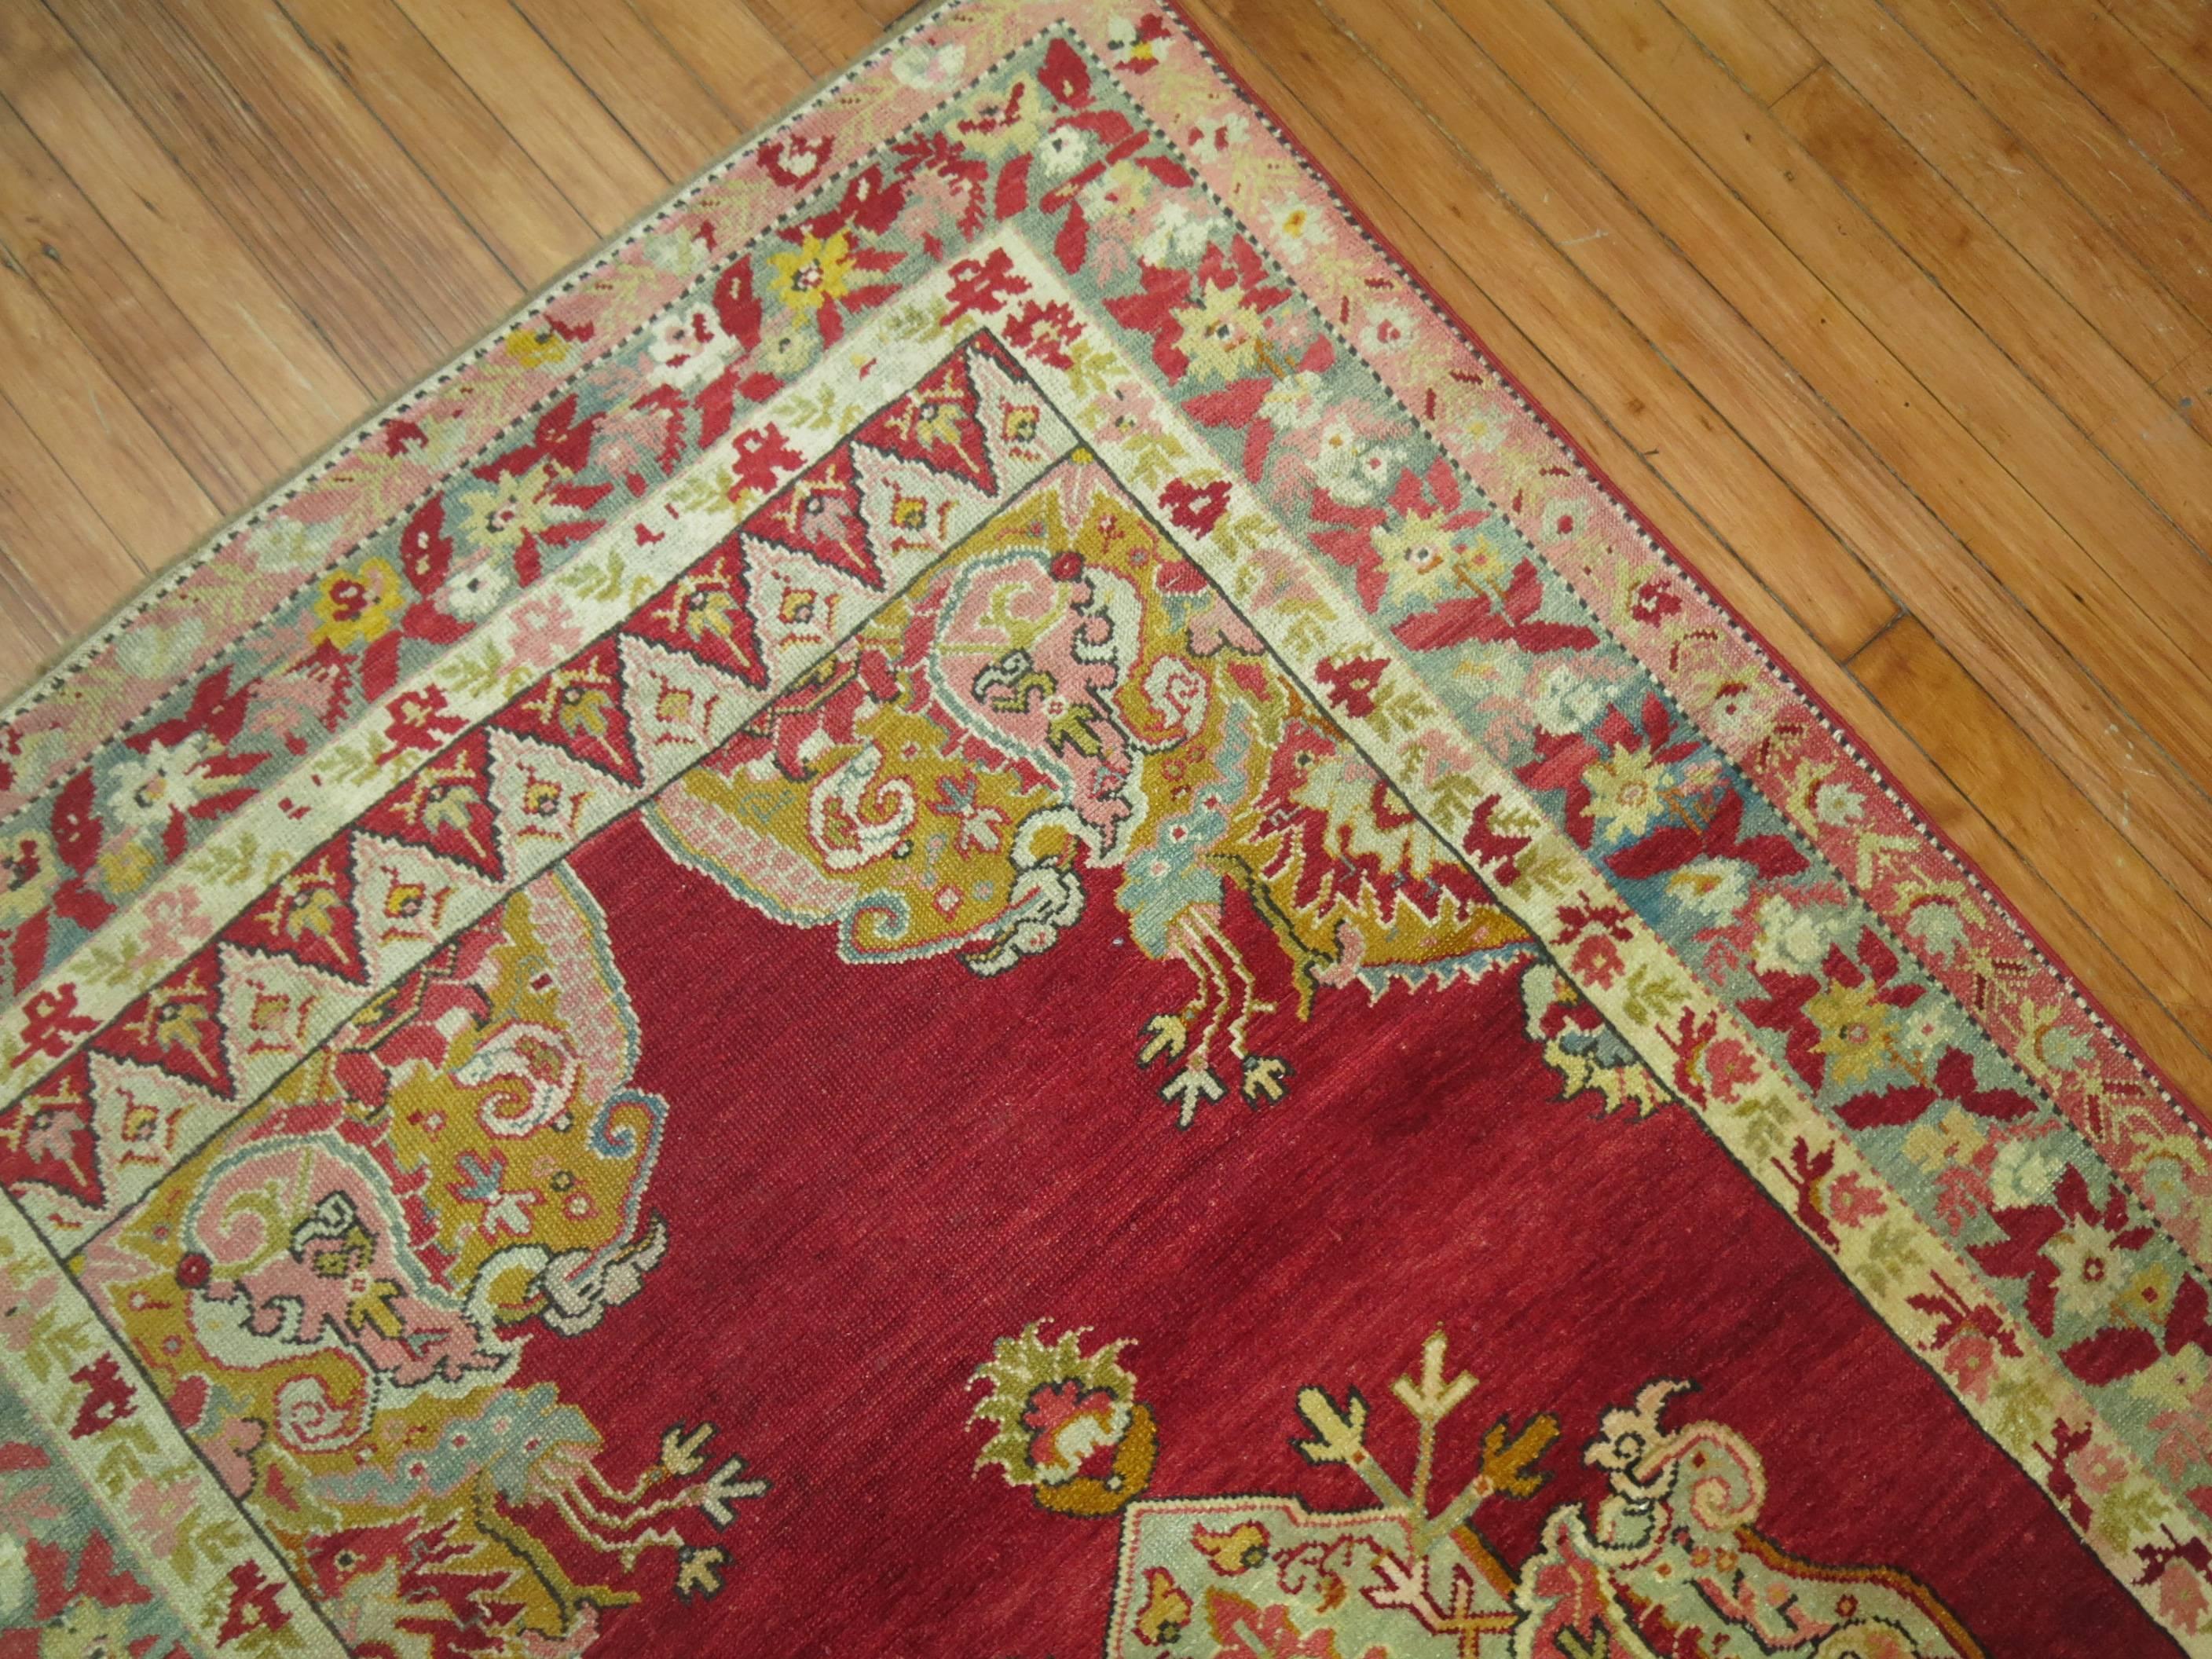 Hand-Woven Cherry Red Antique Turkish Melas Rug, Early 20th Century